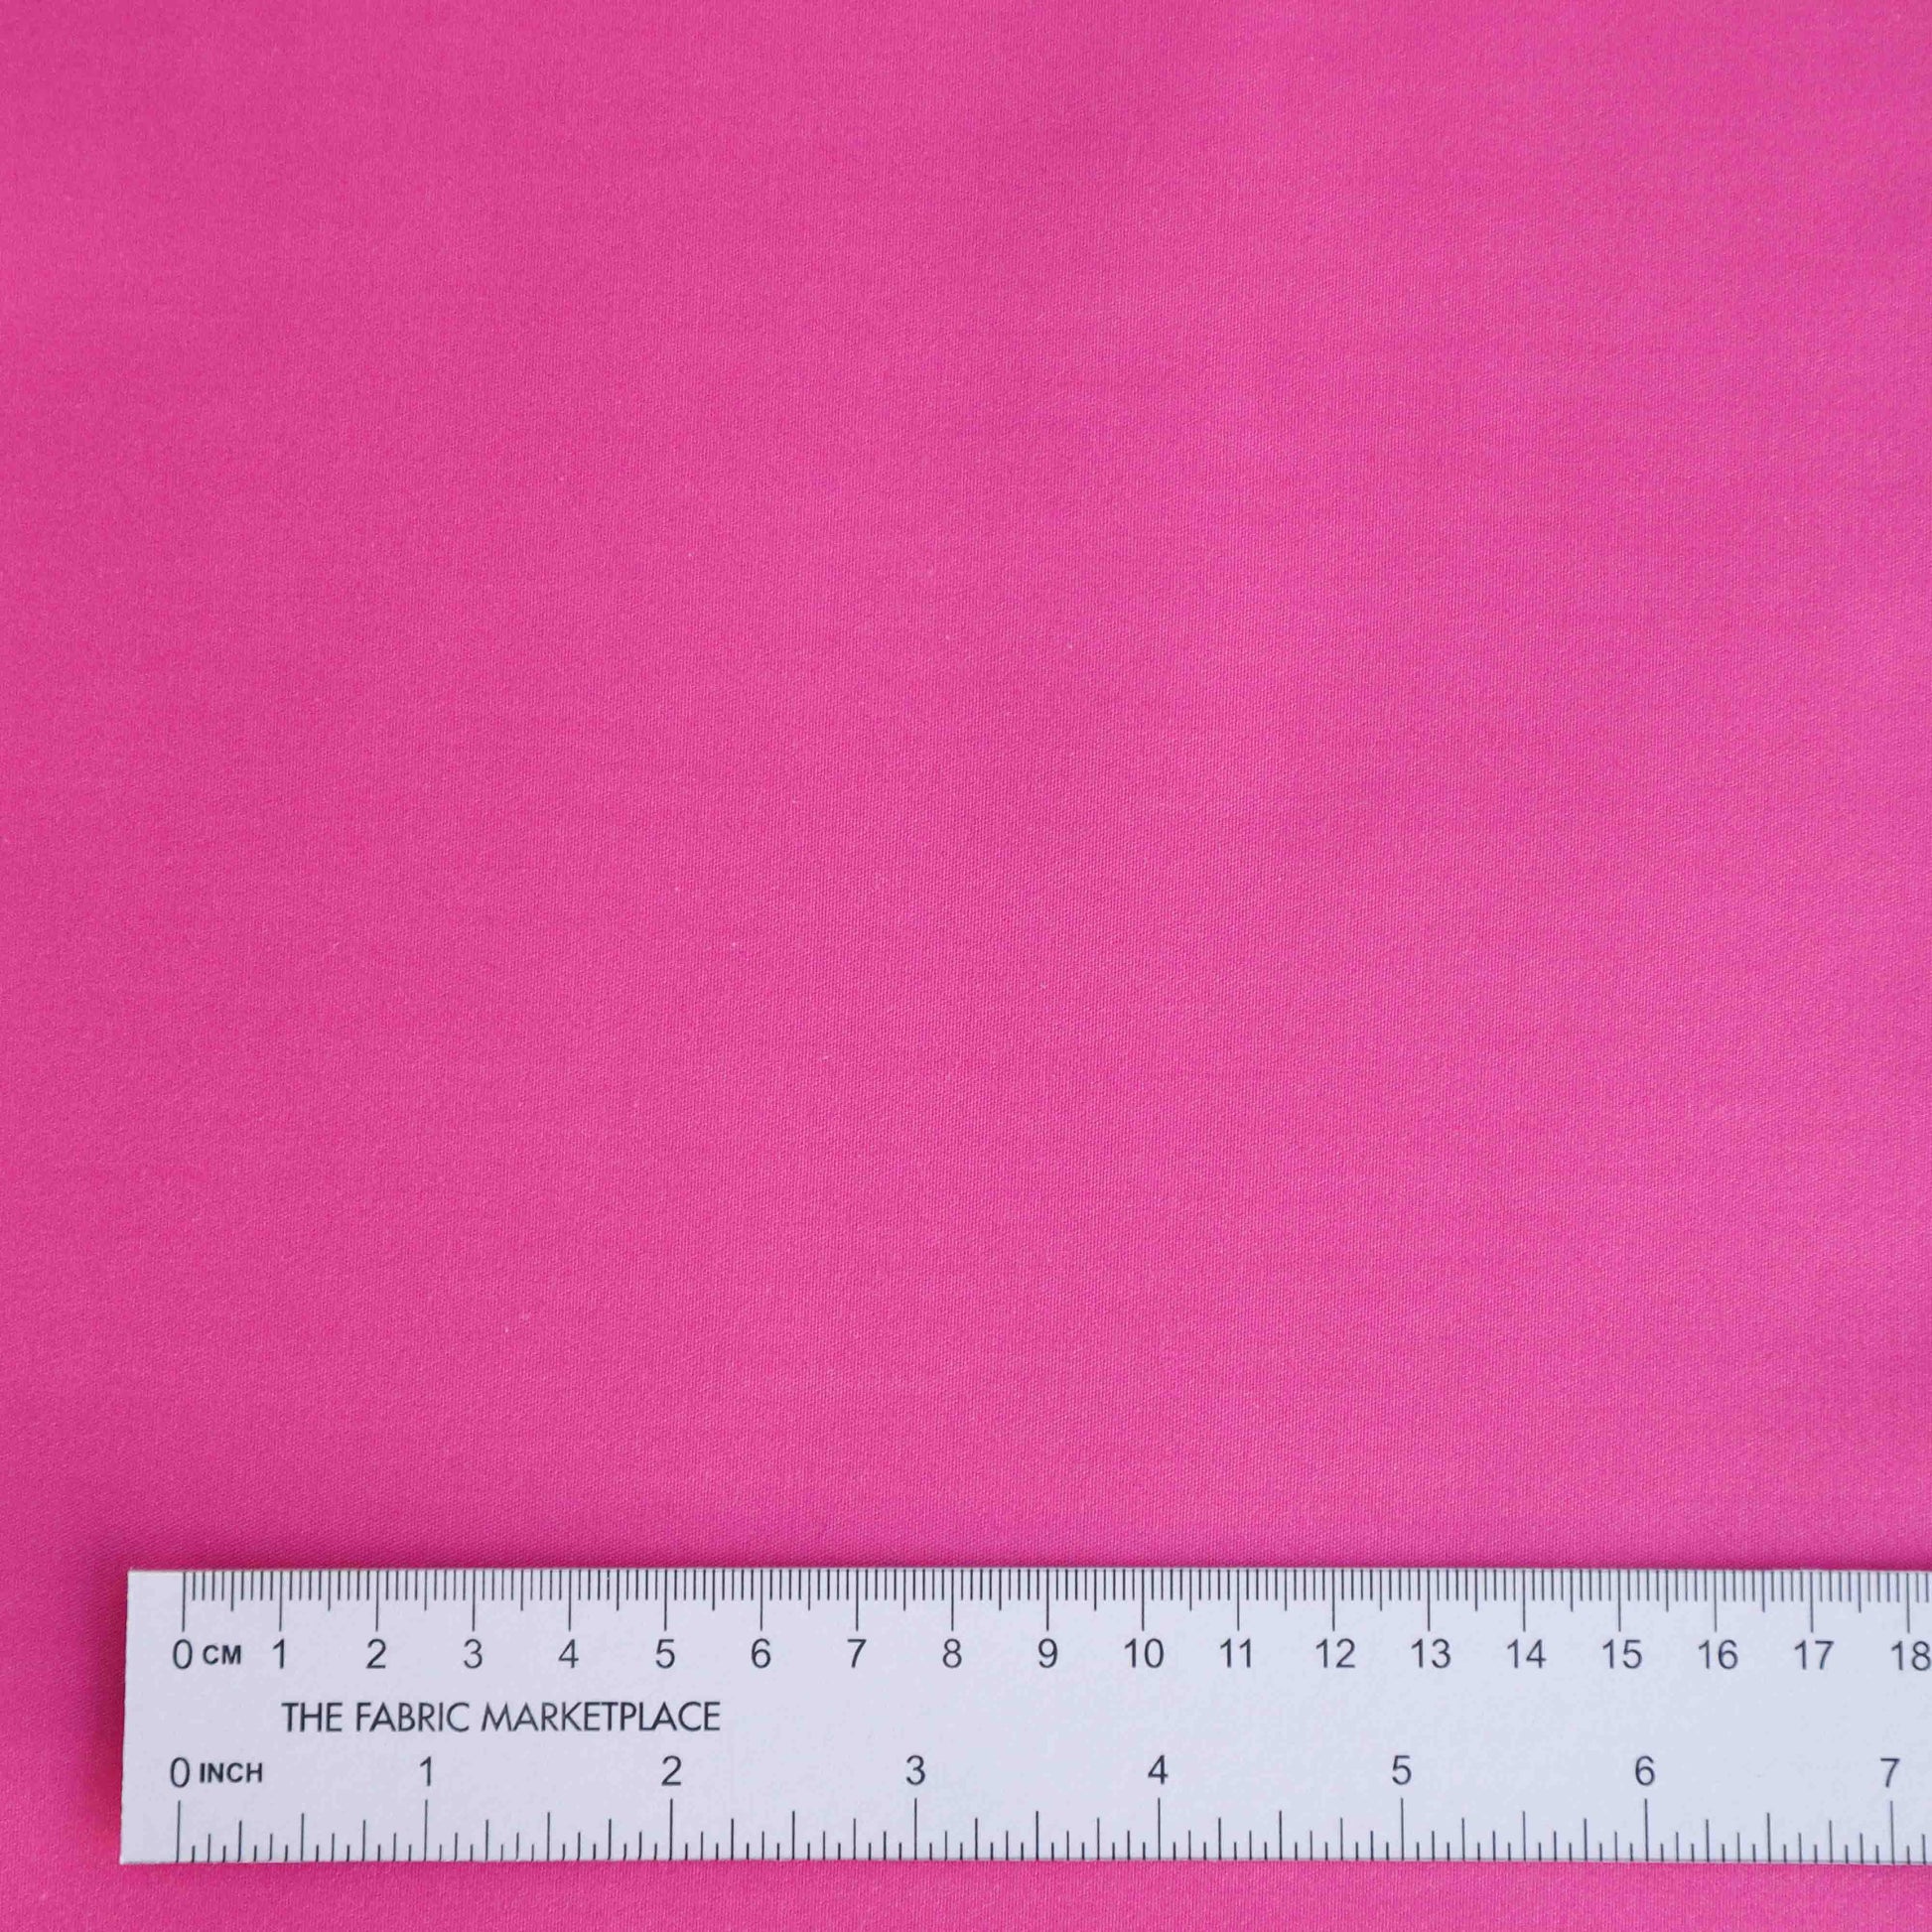 A heavyweight cotton twill in fuchsia. This fabric has a dry, smooth hand feel yet softens considerably after washing. This fluid-non stretch fabric has subtle texture throughout and matte finish.